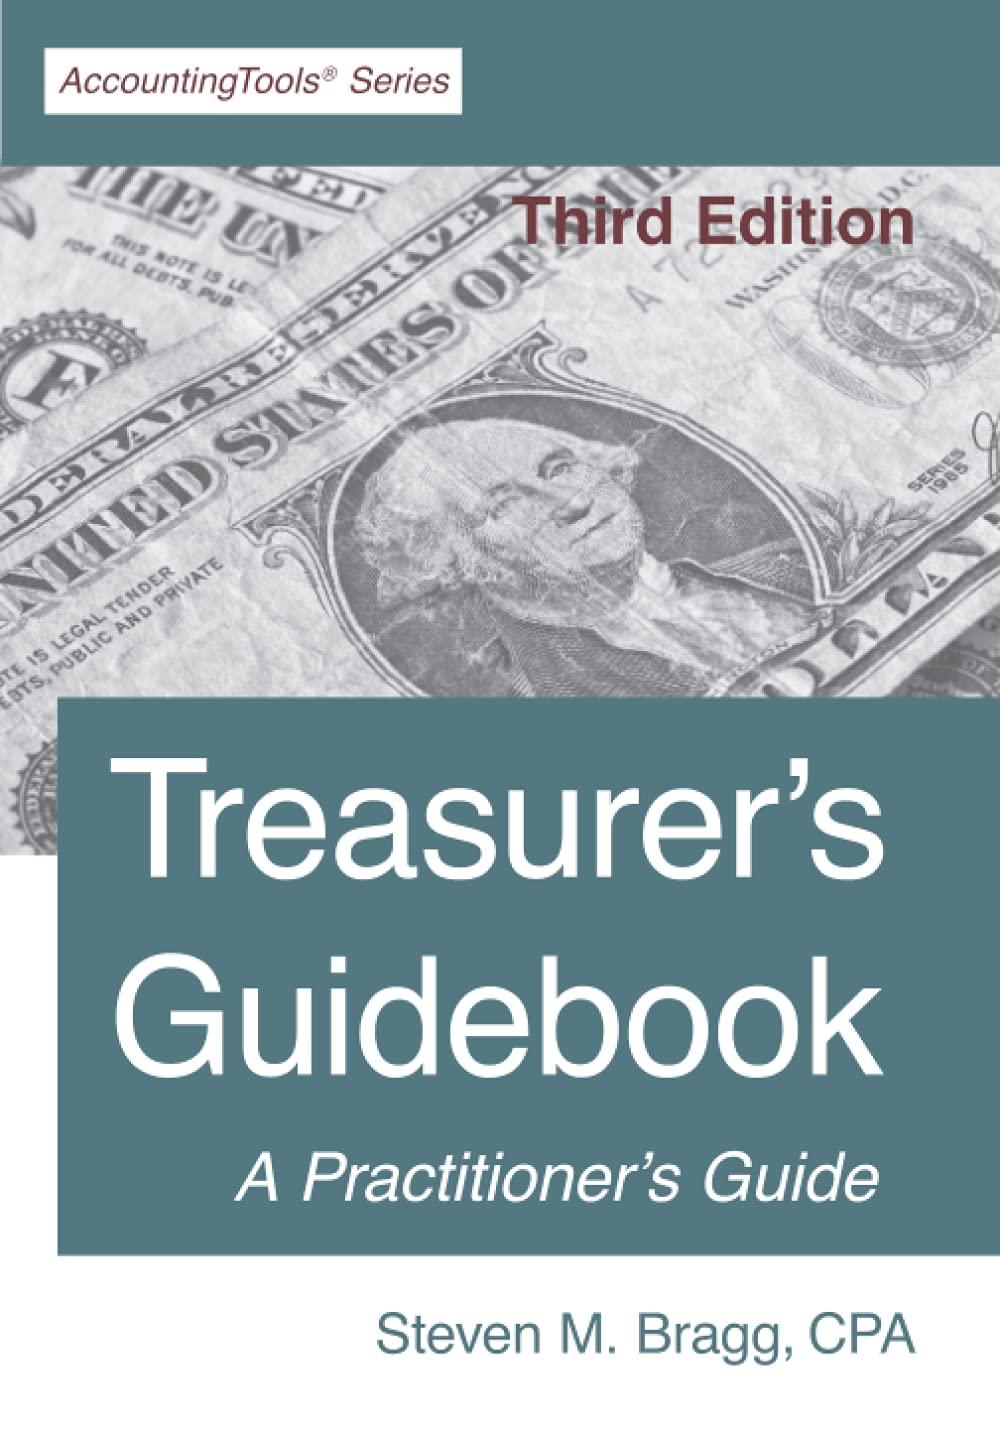 treasurers guidebook a practitioners guide 3rd edition steven m. bragg 1642210722, 978-1642210729